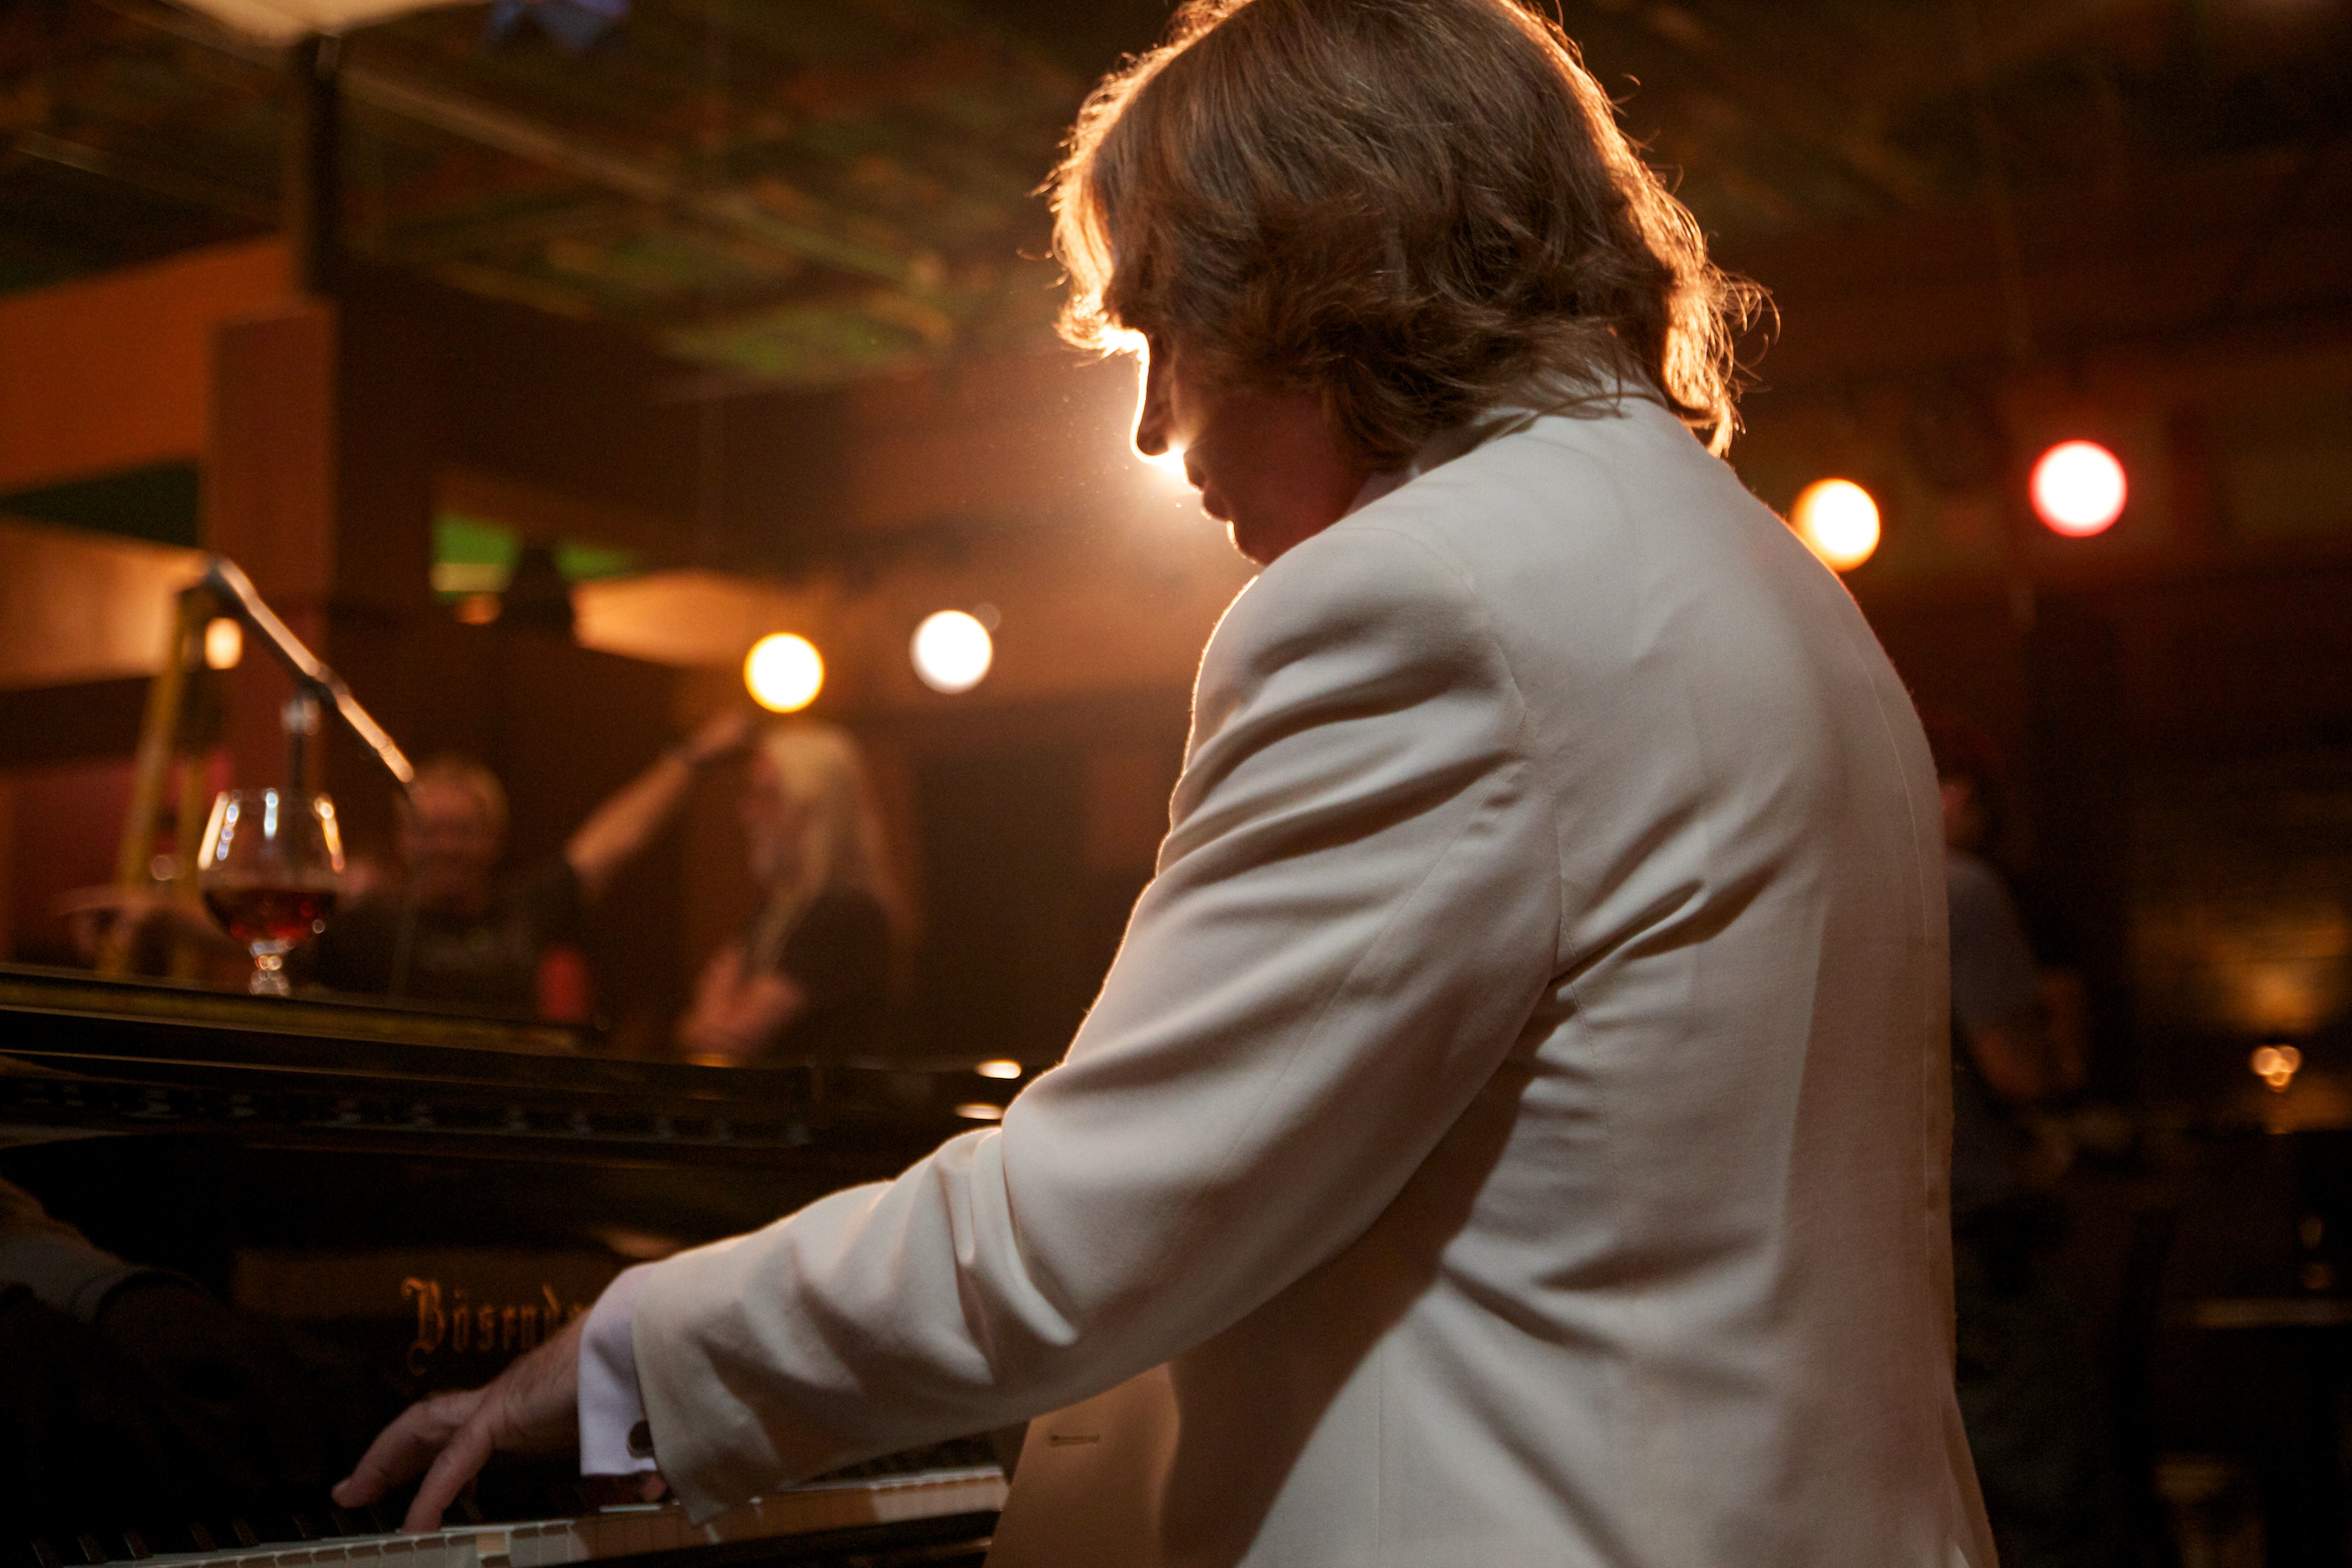 Jack Holmes at the piano on the set of 